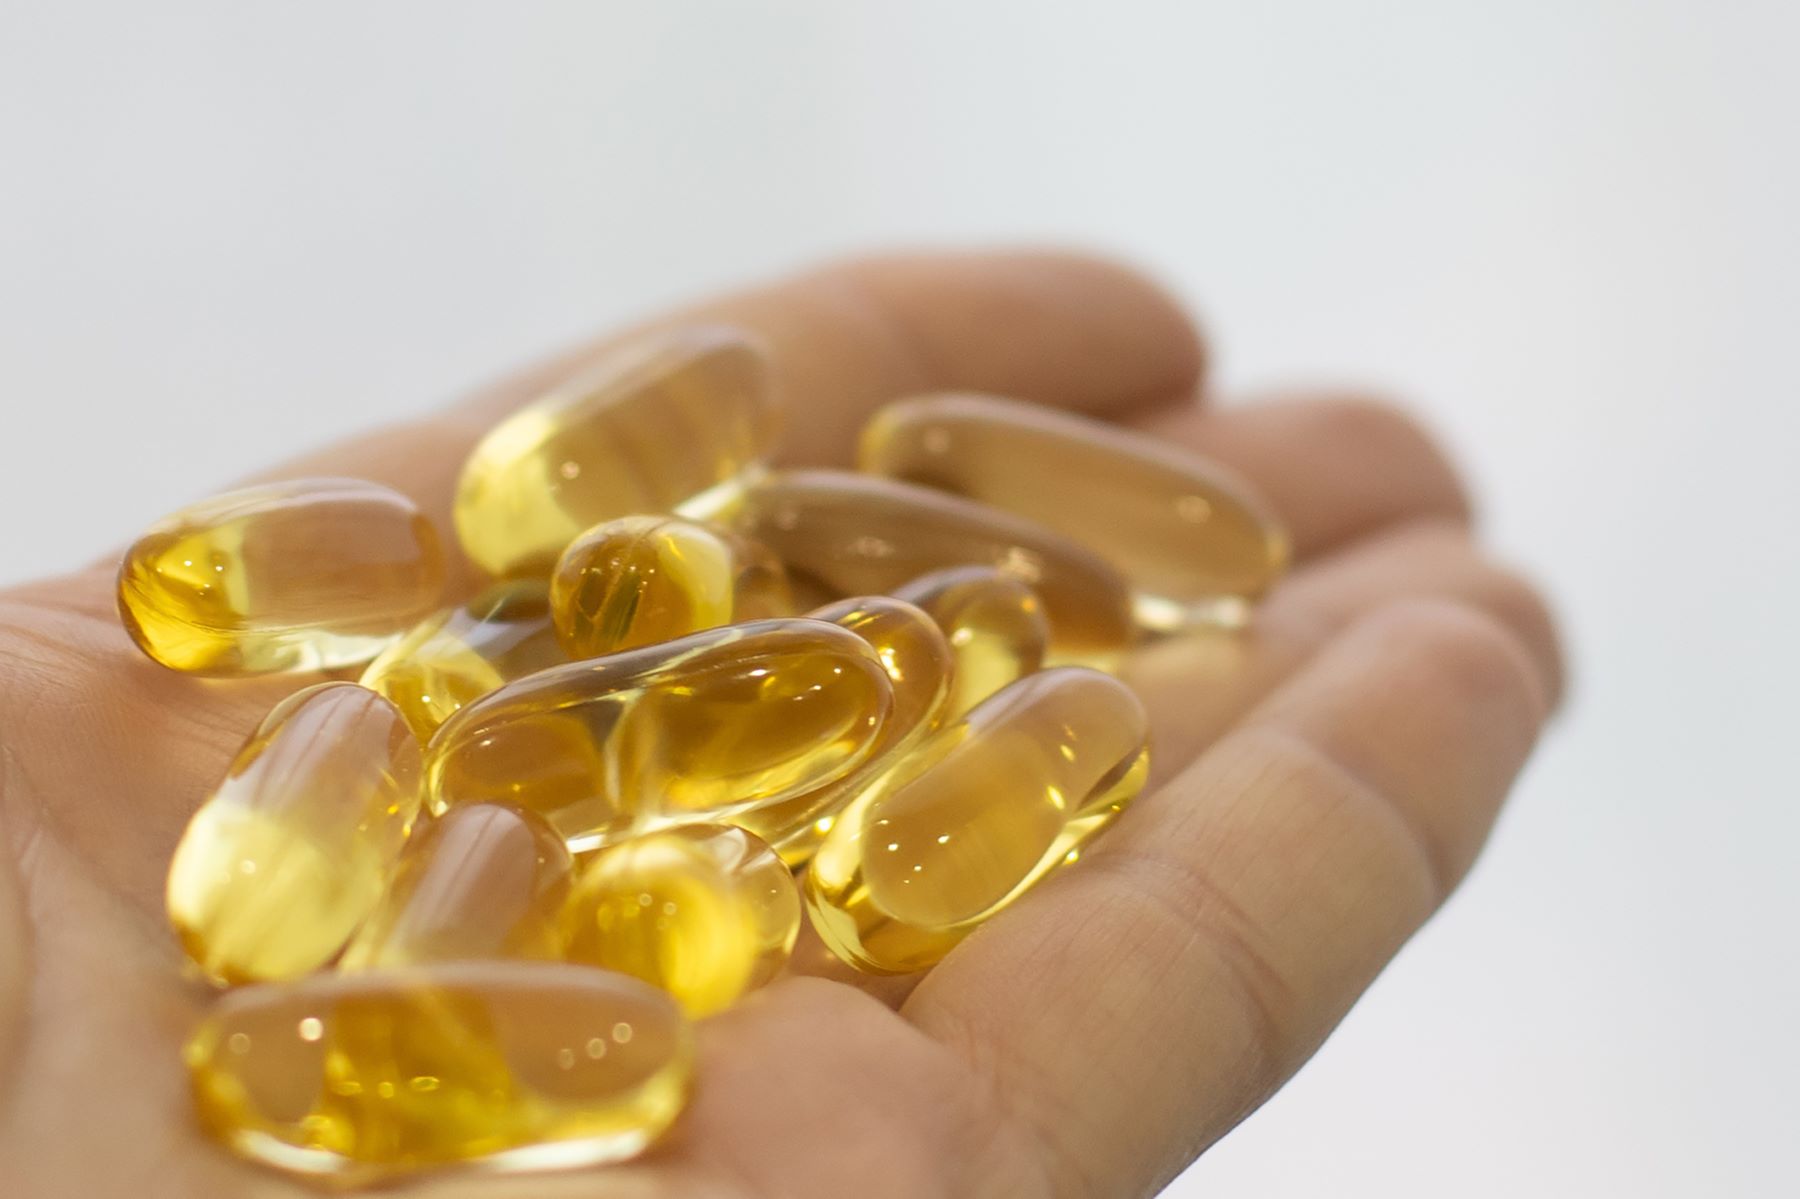 Should I stock up on vitamin D to prevent hair loss?